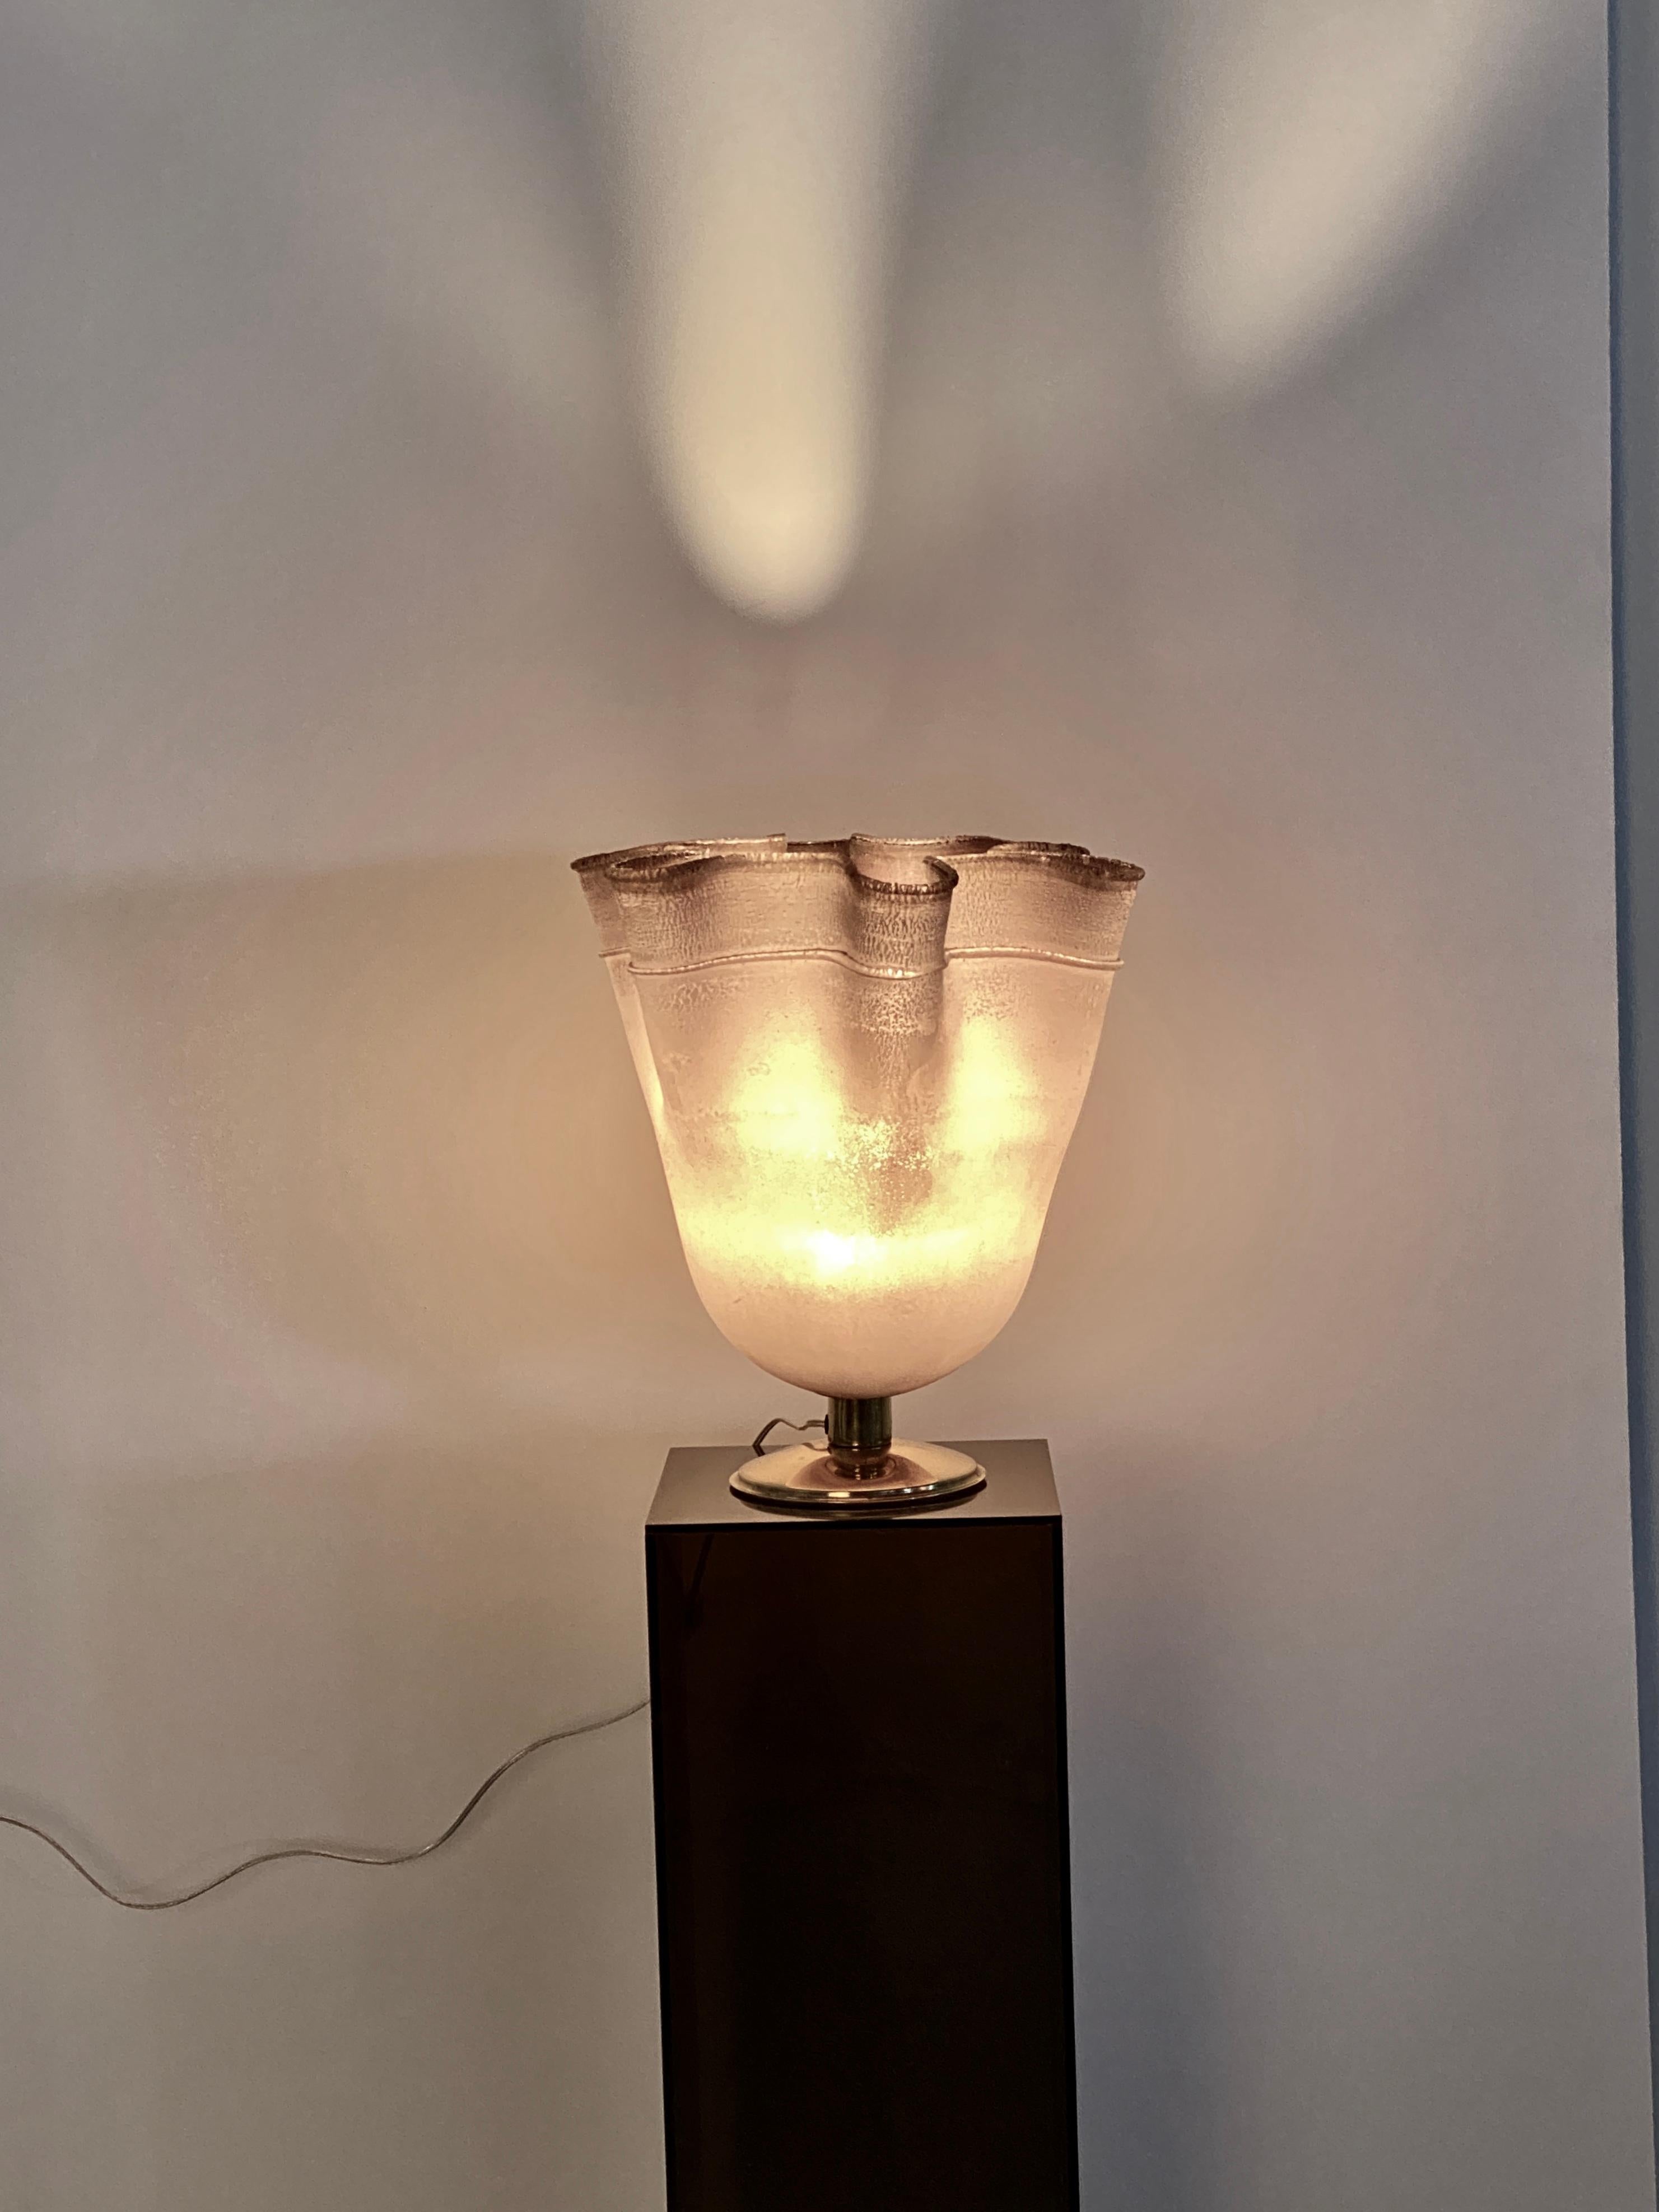 Barbini Scavo Glass Table Lamp, Italy, circa 1980s In Good Condition For Sale In Norwalk, CT